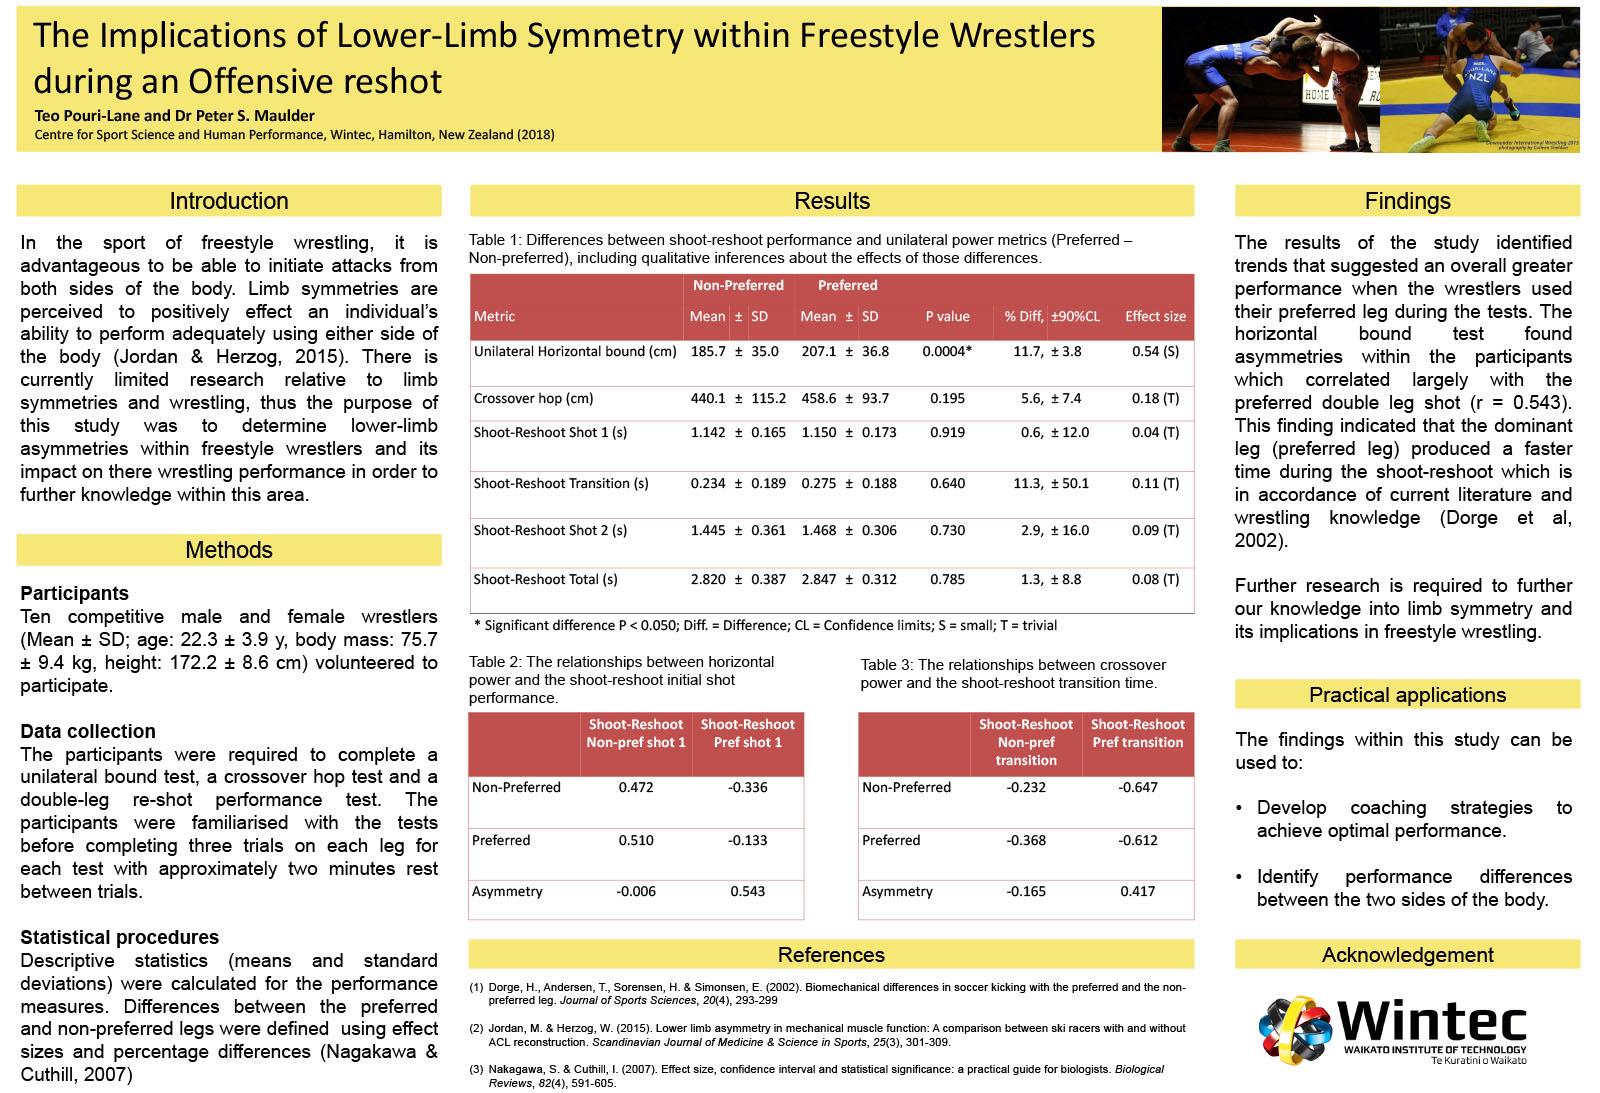 The Implications of Lower-Limb Symmetry within Freestyle Wrestlers during an Offensive reshot